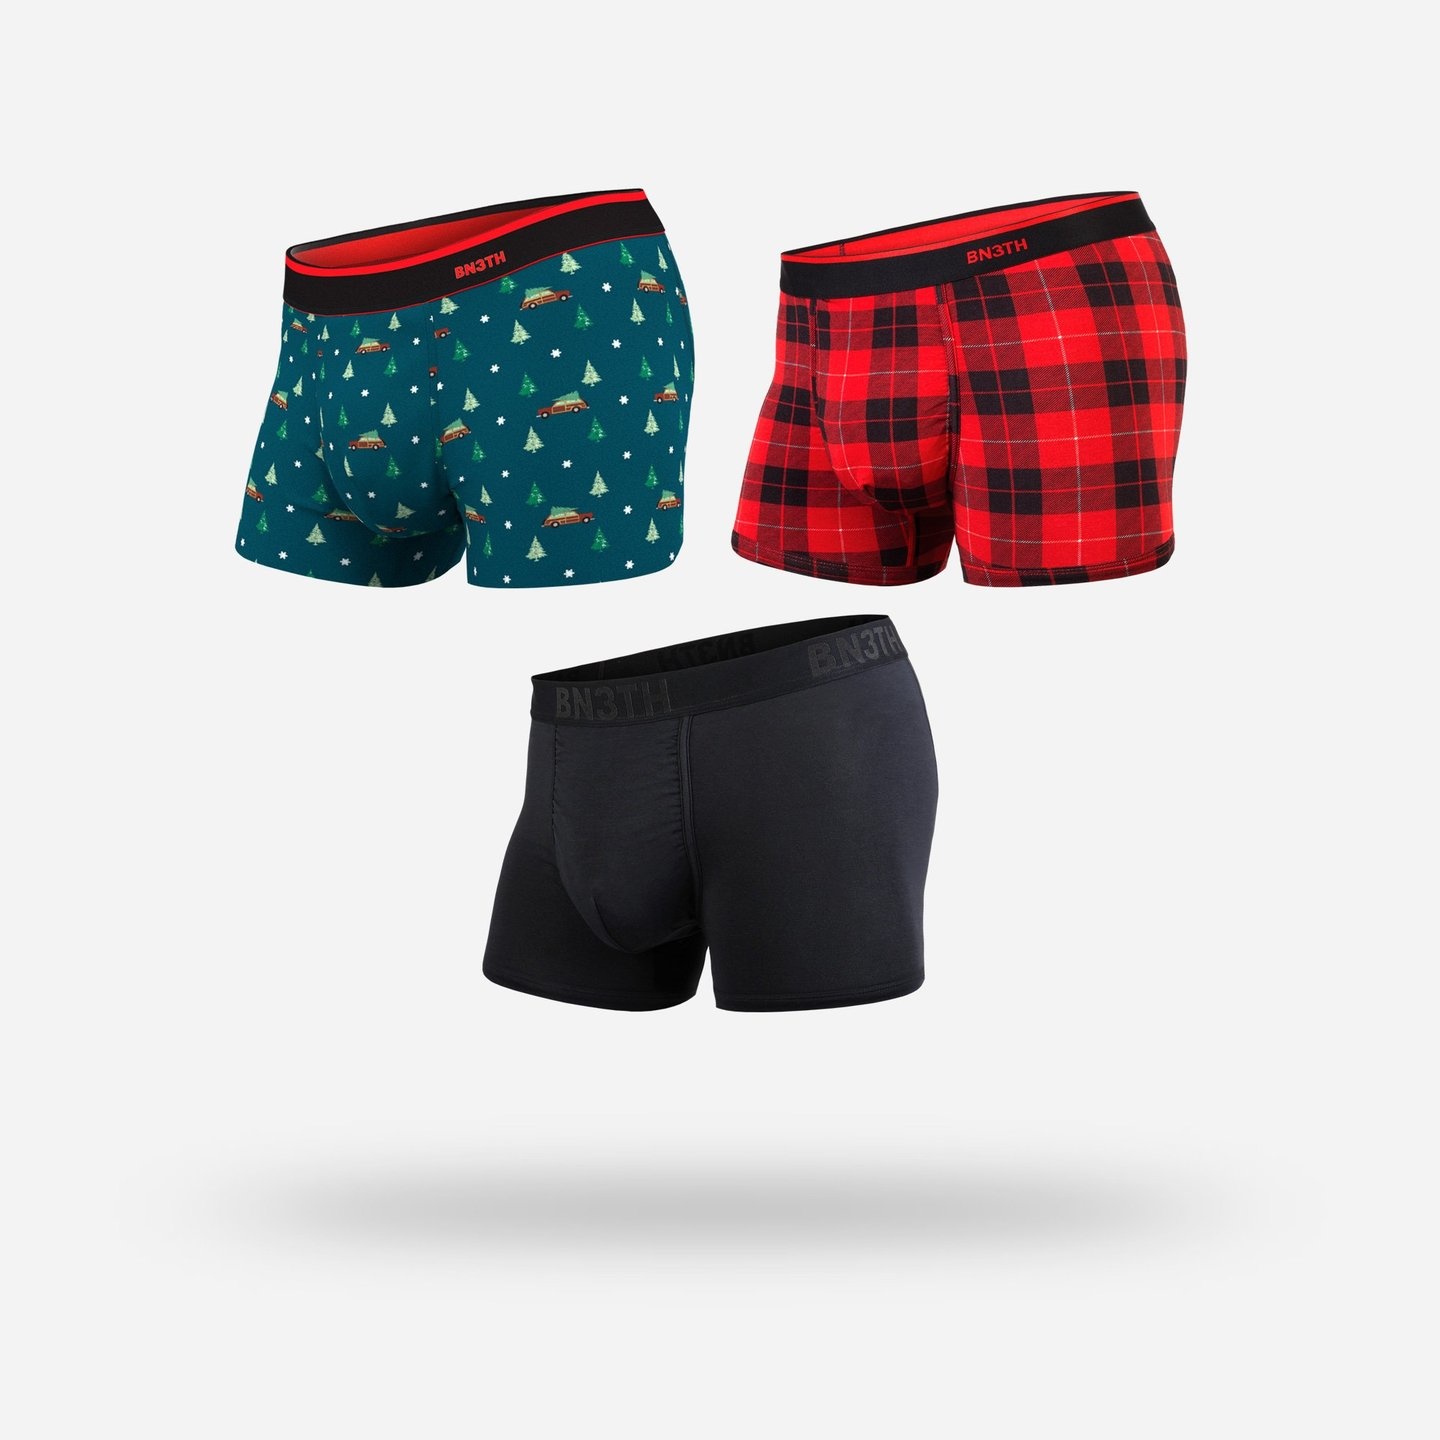 Bambody Absorbent Boyshort: Classic Fit Trunk Style Underwear for